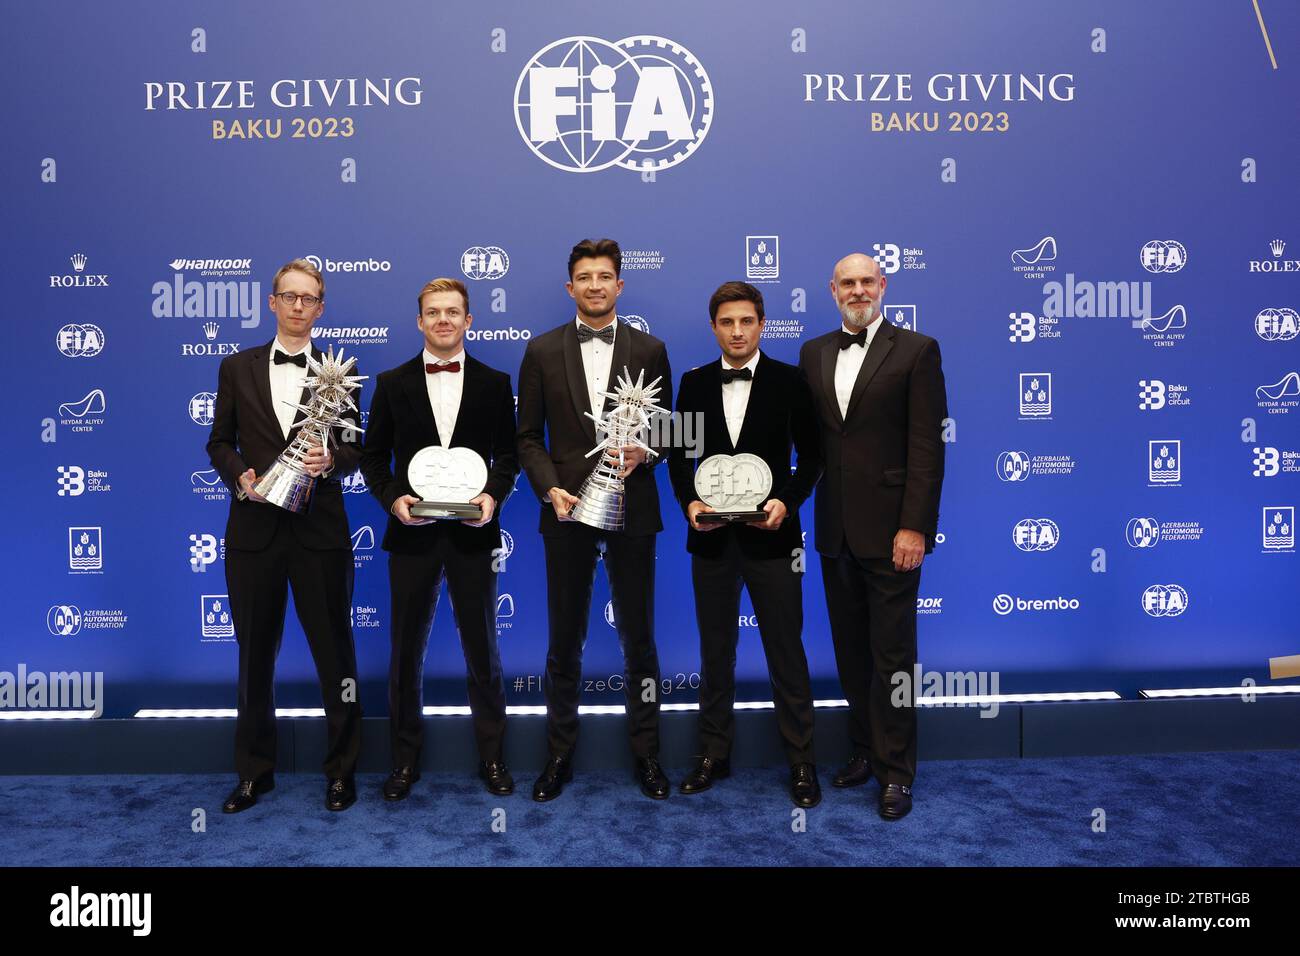 FILIPPI Sylvain, ABB FIA Formula E World Championship - Manufacturer Champion, portrait CASSIDY Nick, ABB FIA Formula E World Championship - 2nd Place, portrait EVANS Mitch, ABB FIA Formula E World Championship - 3rd Place, portrait DENNIS Jake, ABB FIA Formula E World Championship - Champion, portrait during the 2023 FIA Prize Giving Ceremony in Baky on December 8, 2023 at Baku Convention Center in Baku, Azerbaijan Credit: Independent Photo Agency/Alamy Live News Stock Photo